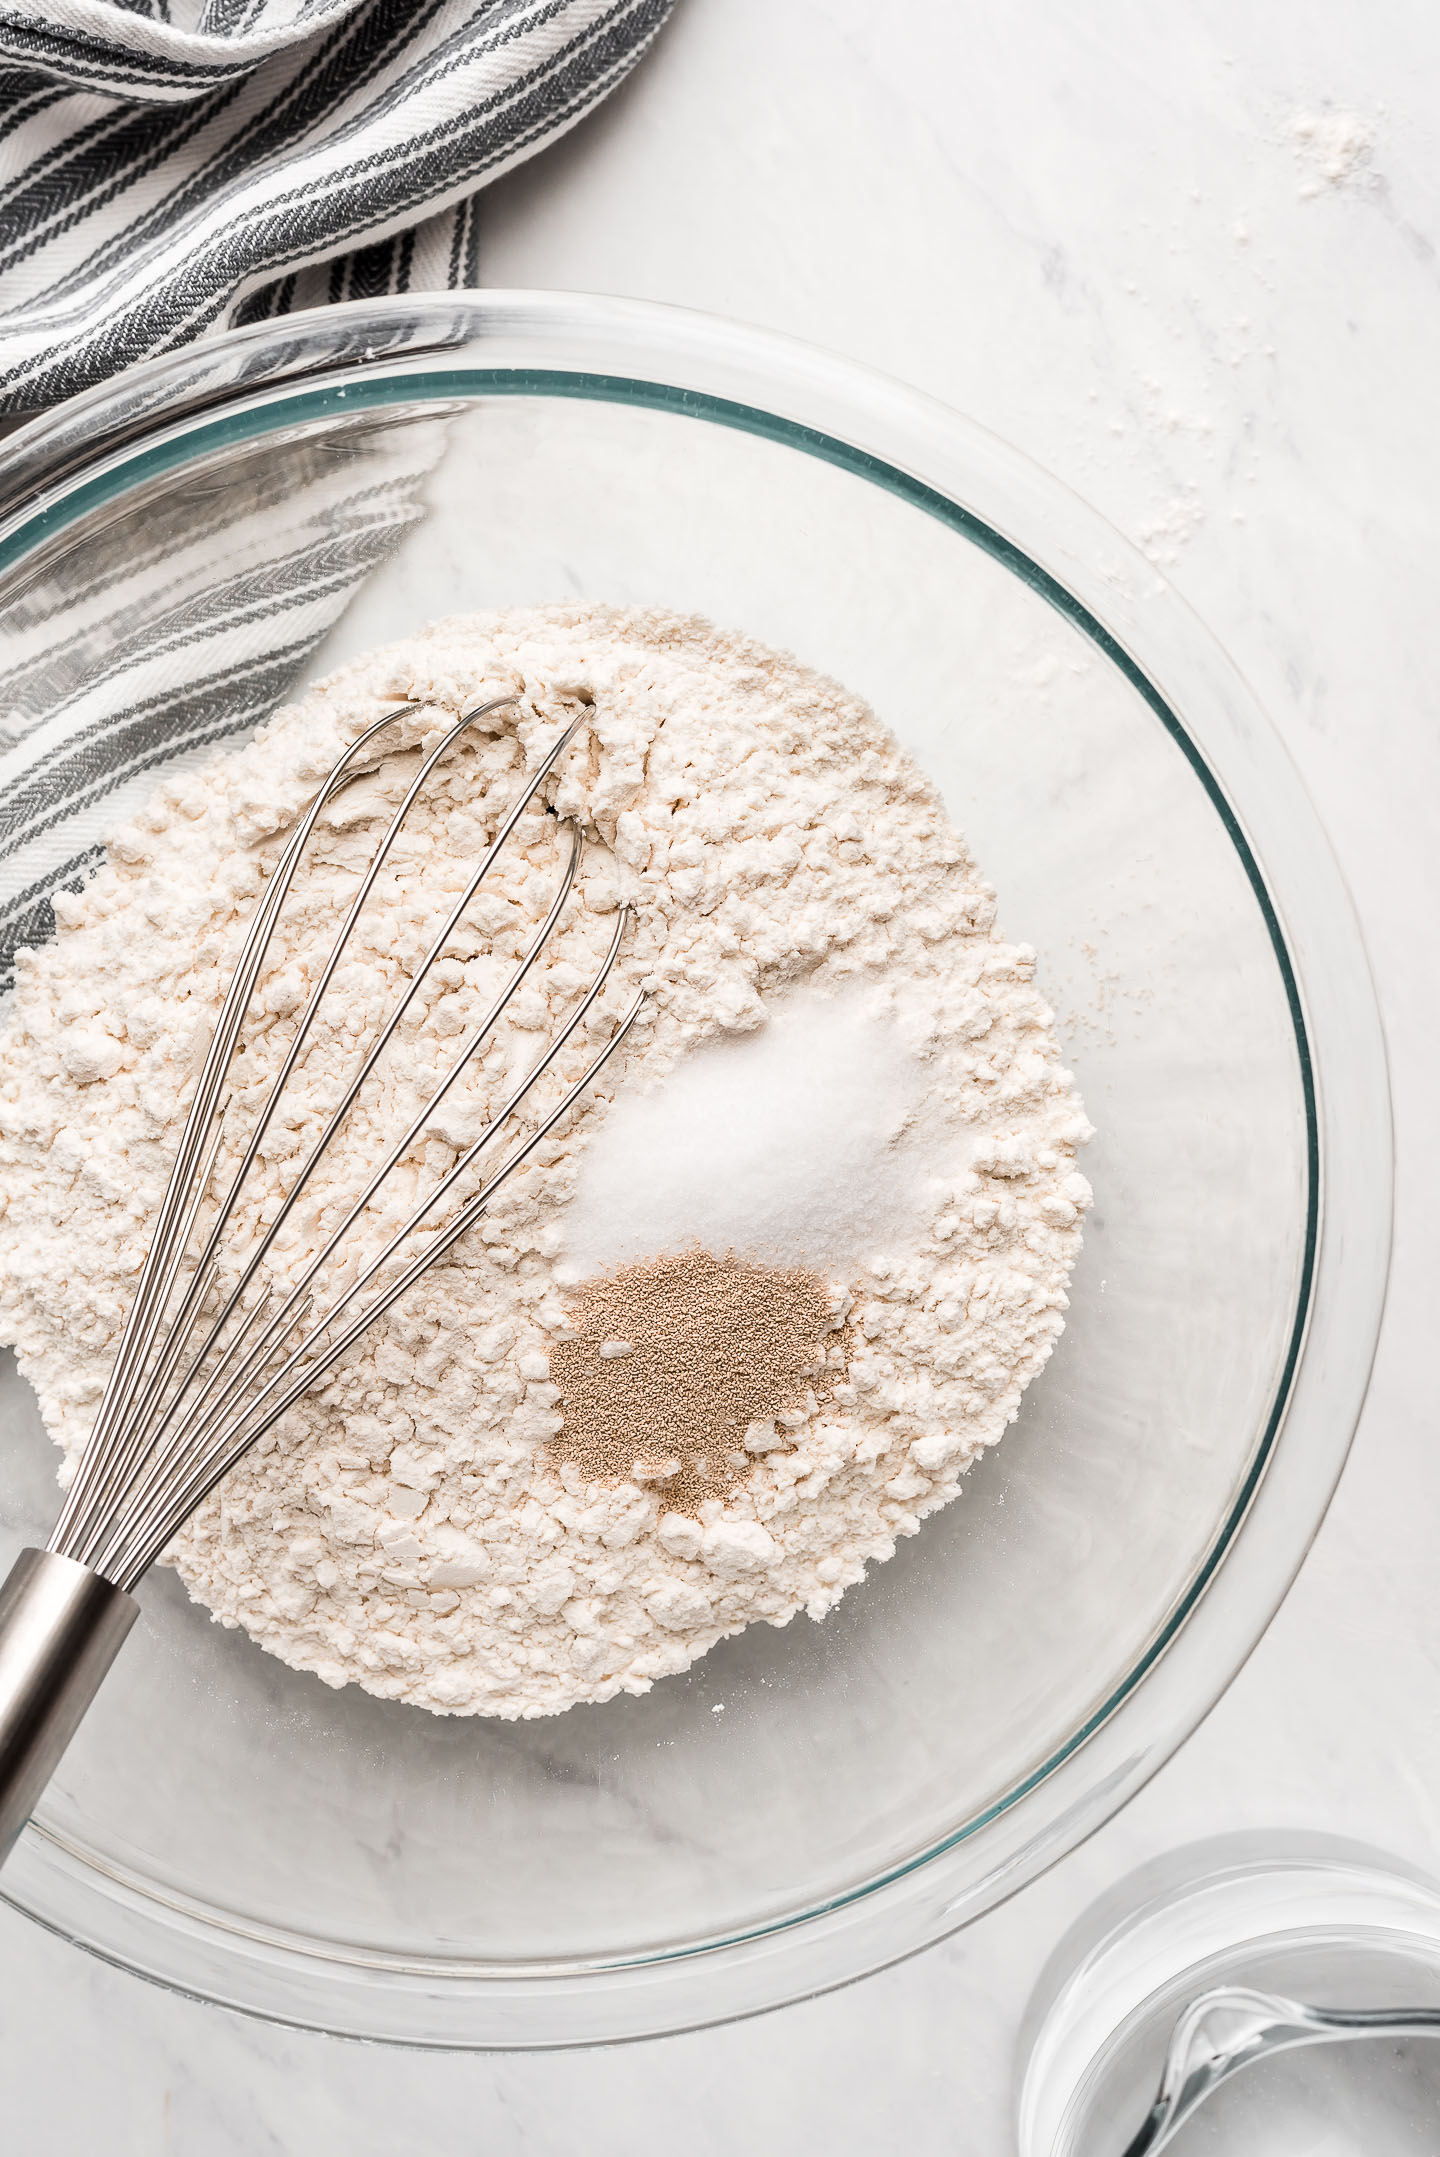 A glass mixing bowl with flour, salt, and yeast.